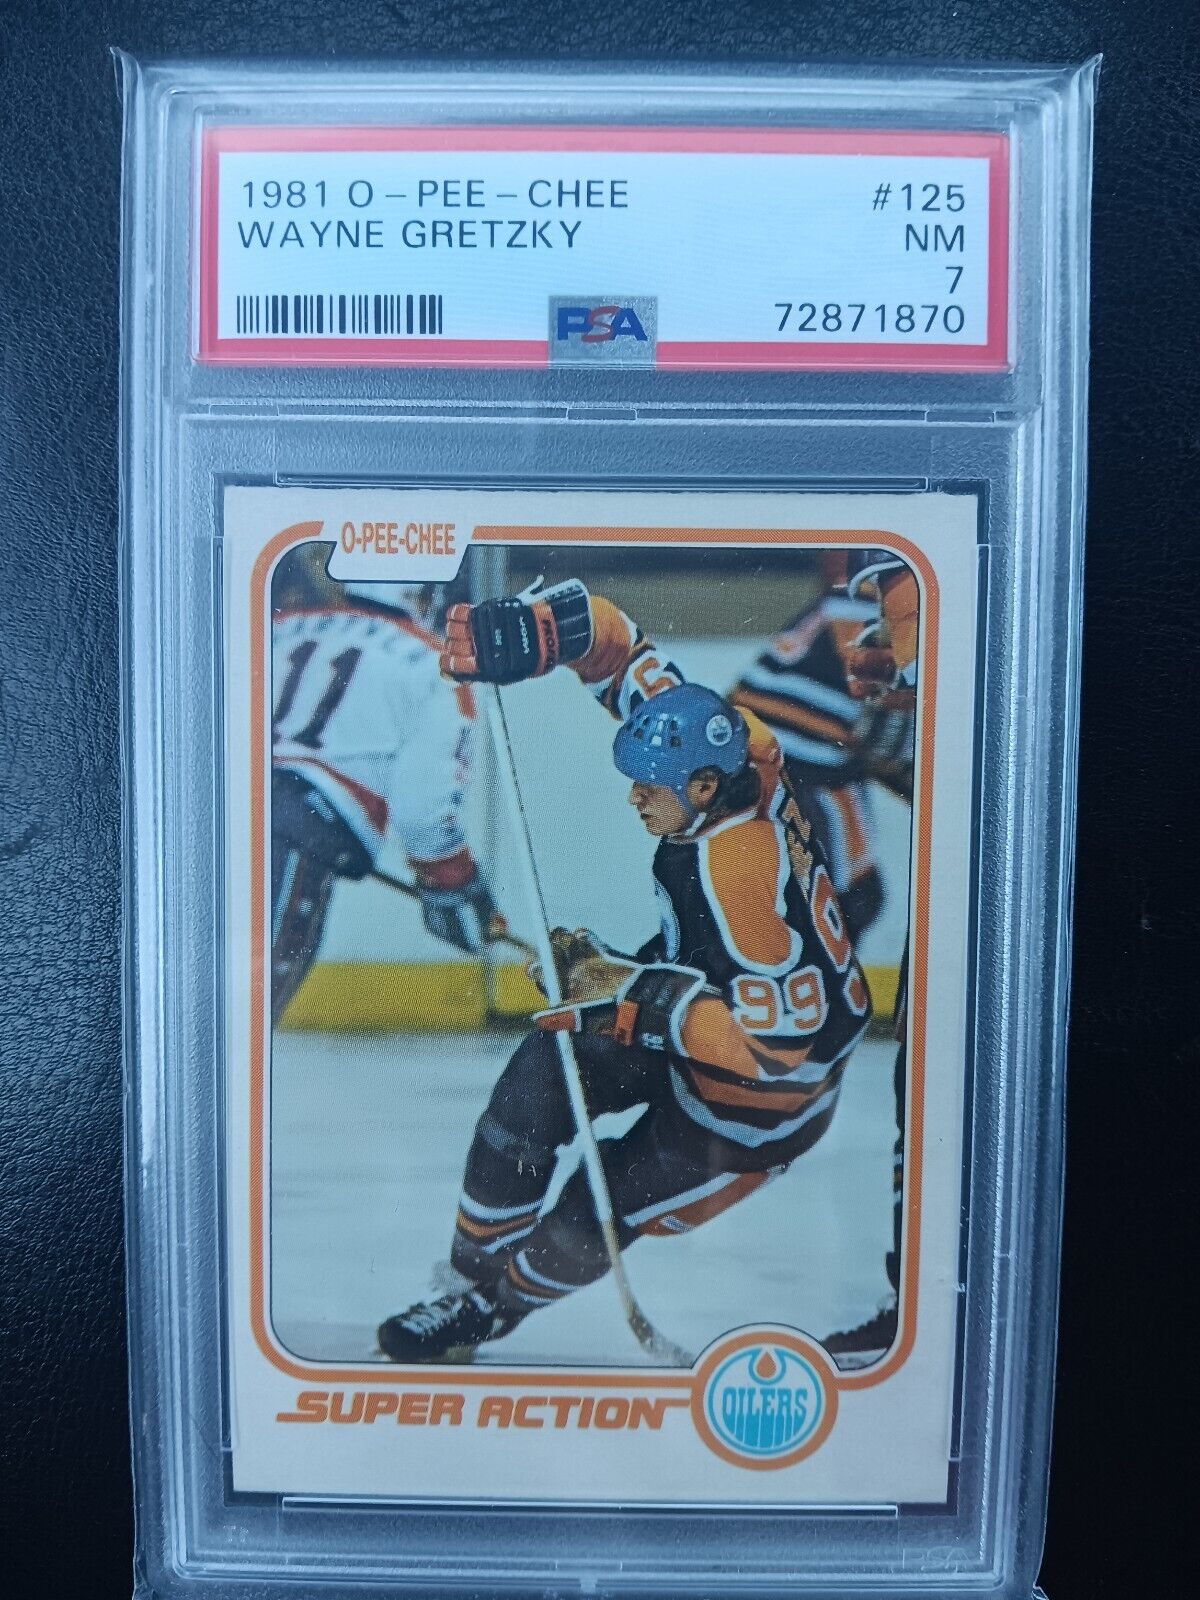 1981 O Pee Chee OPC 125 Wayne Gretzky Super Action centered PSA 7 The Great One